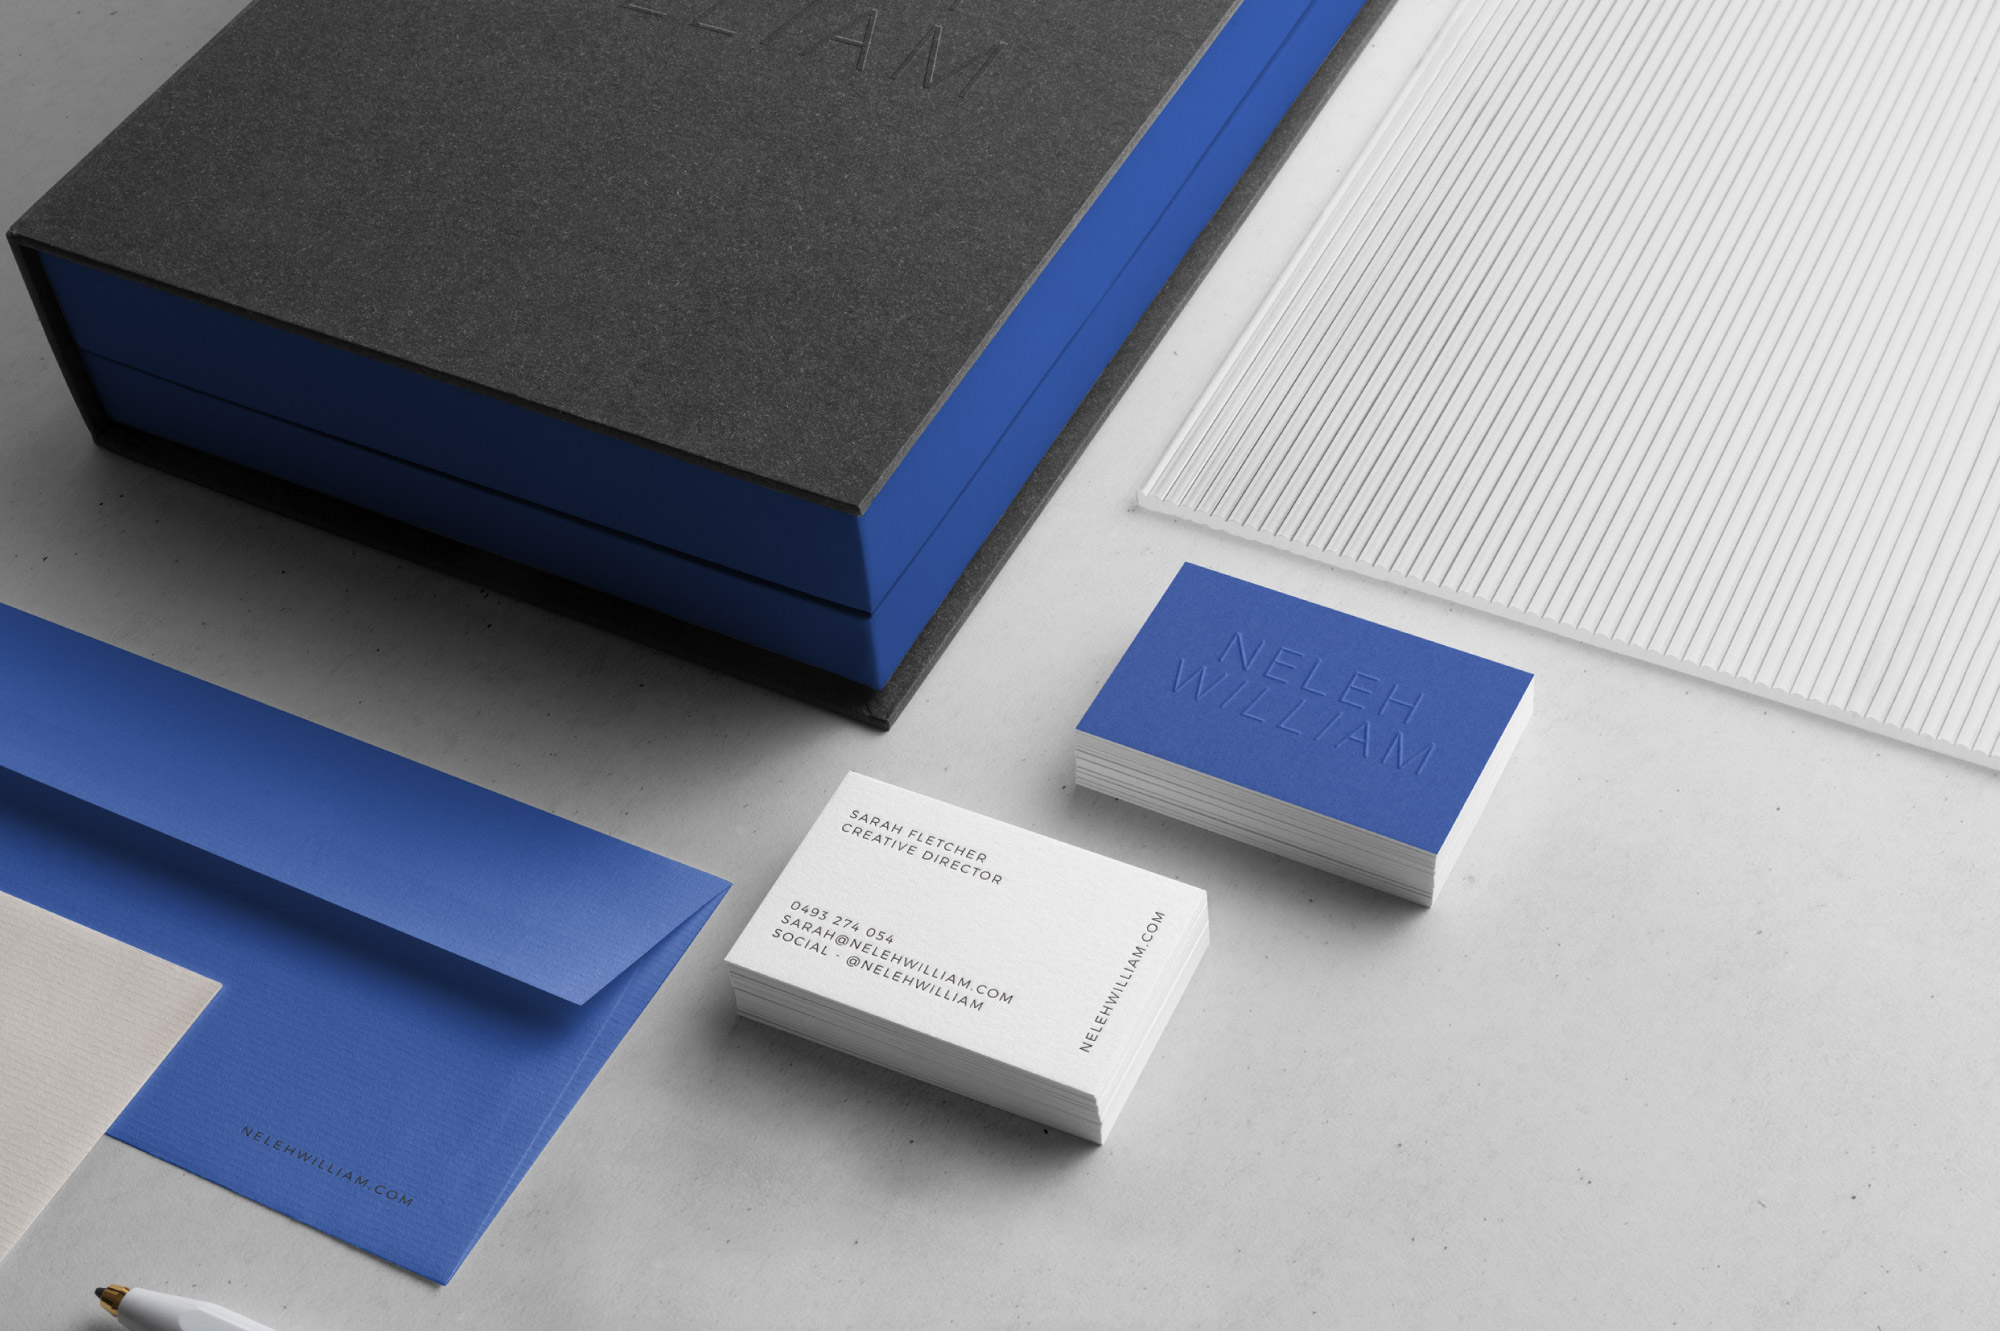 Stationery design in electric blue for Neleh William